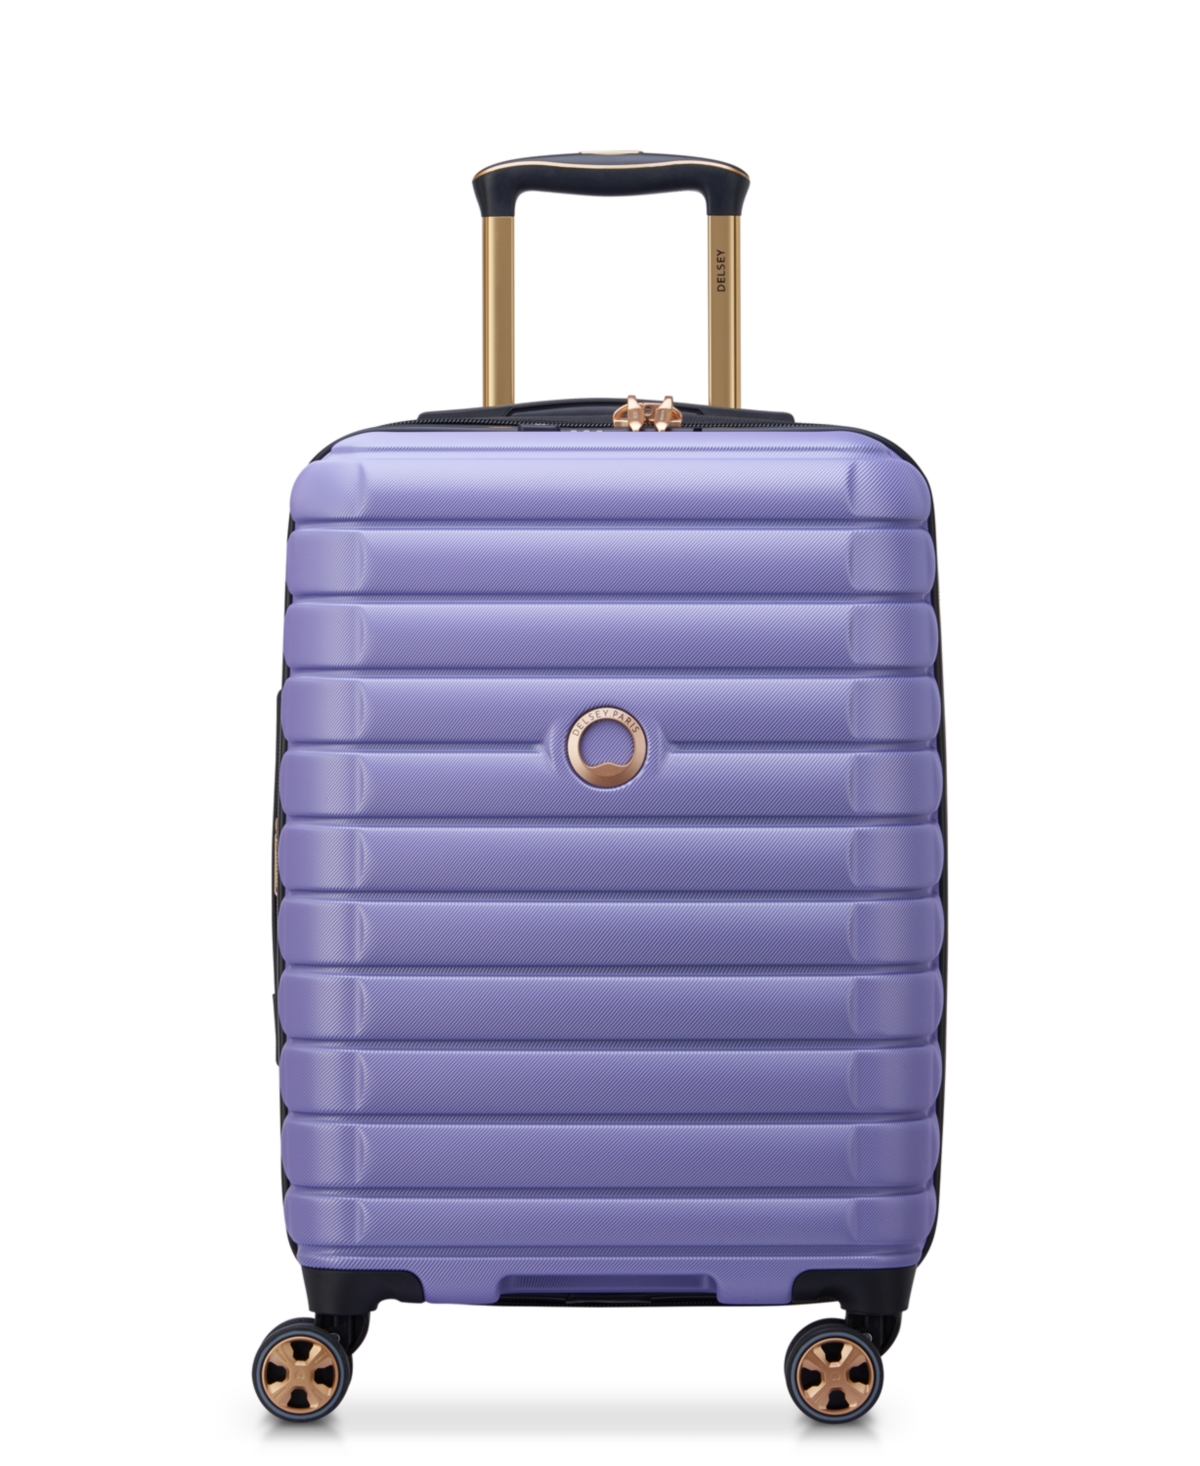 Shadow 5.0 Expandable 20" Spinner Carry on Luggage - Lilac